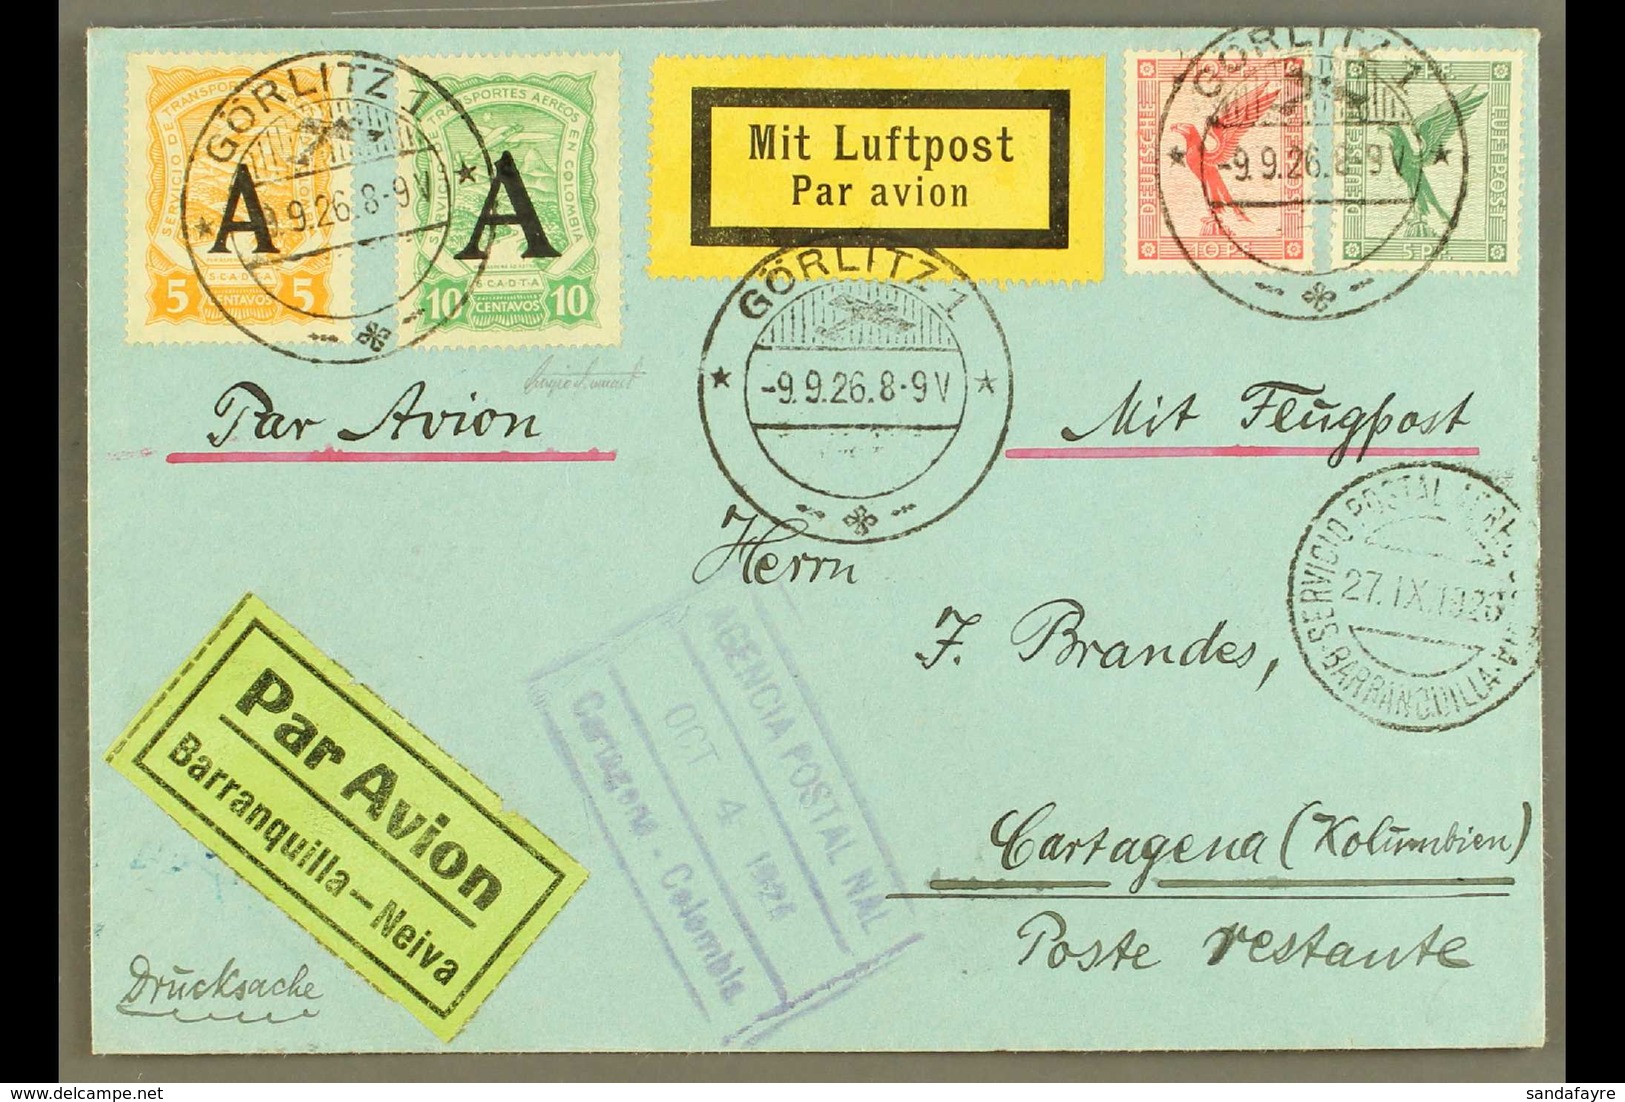 SCADTA  1926 (9 Sep) Printed Matter Airmail Cover From Germany Addressed To Cartagena, Bearing Germany 5pf & 10pf And SC - Colombia